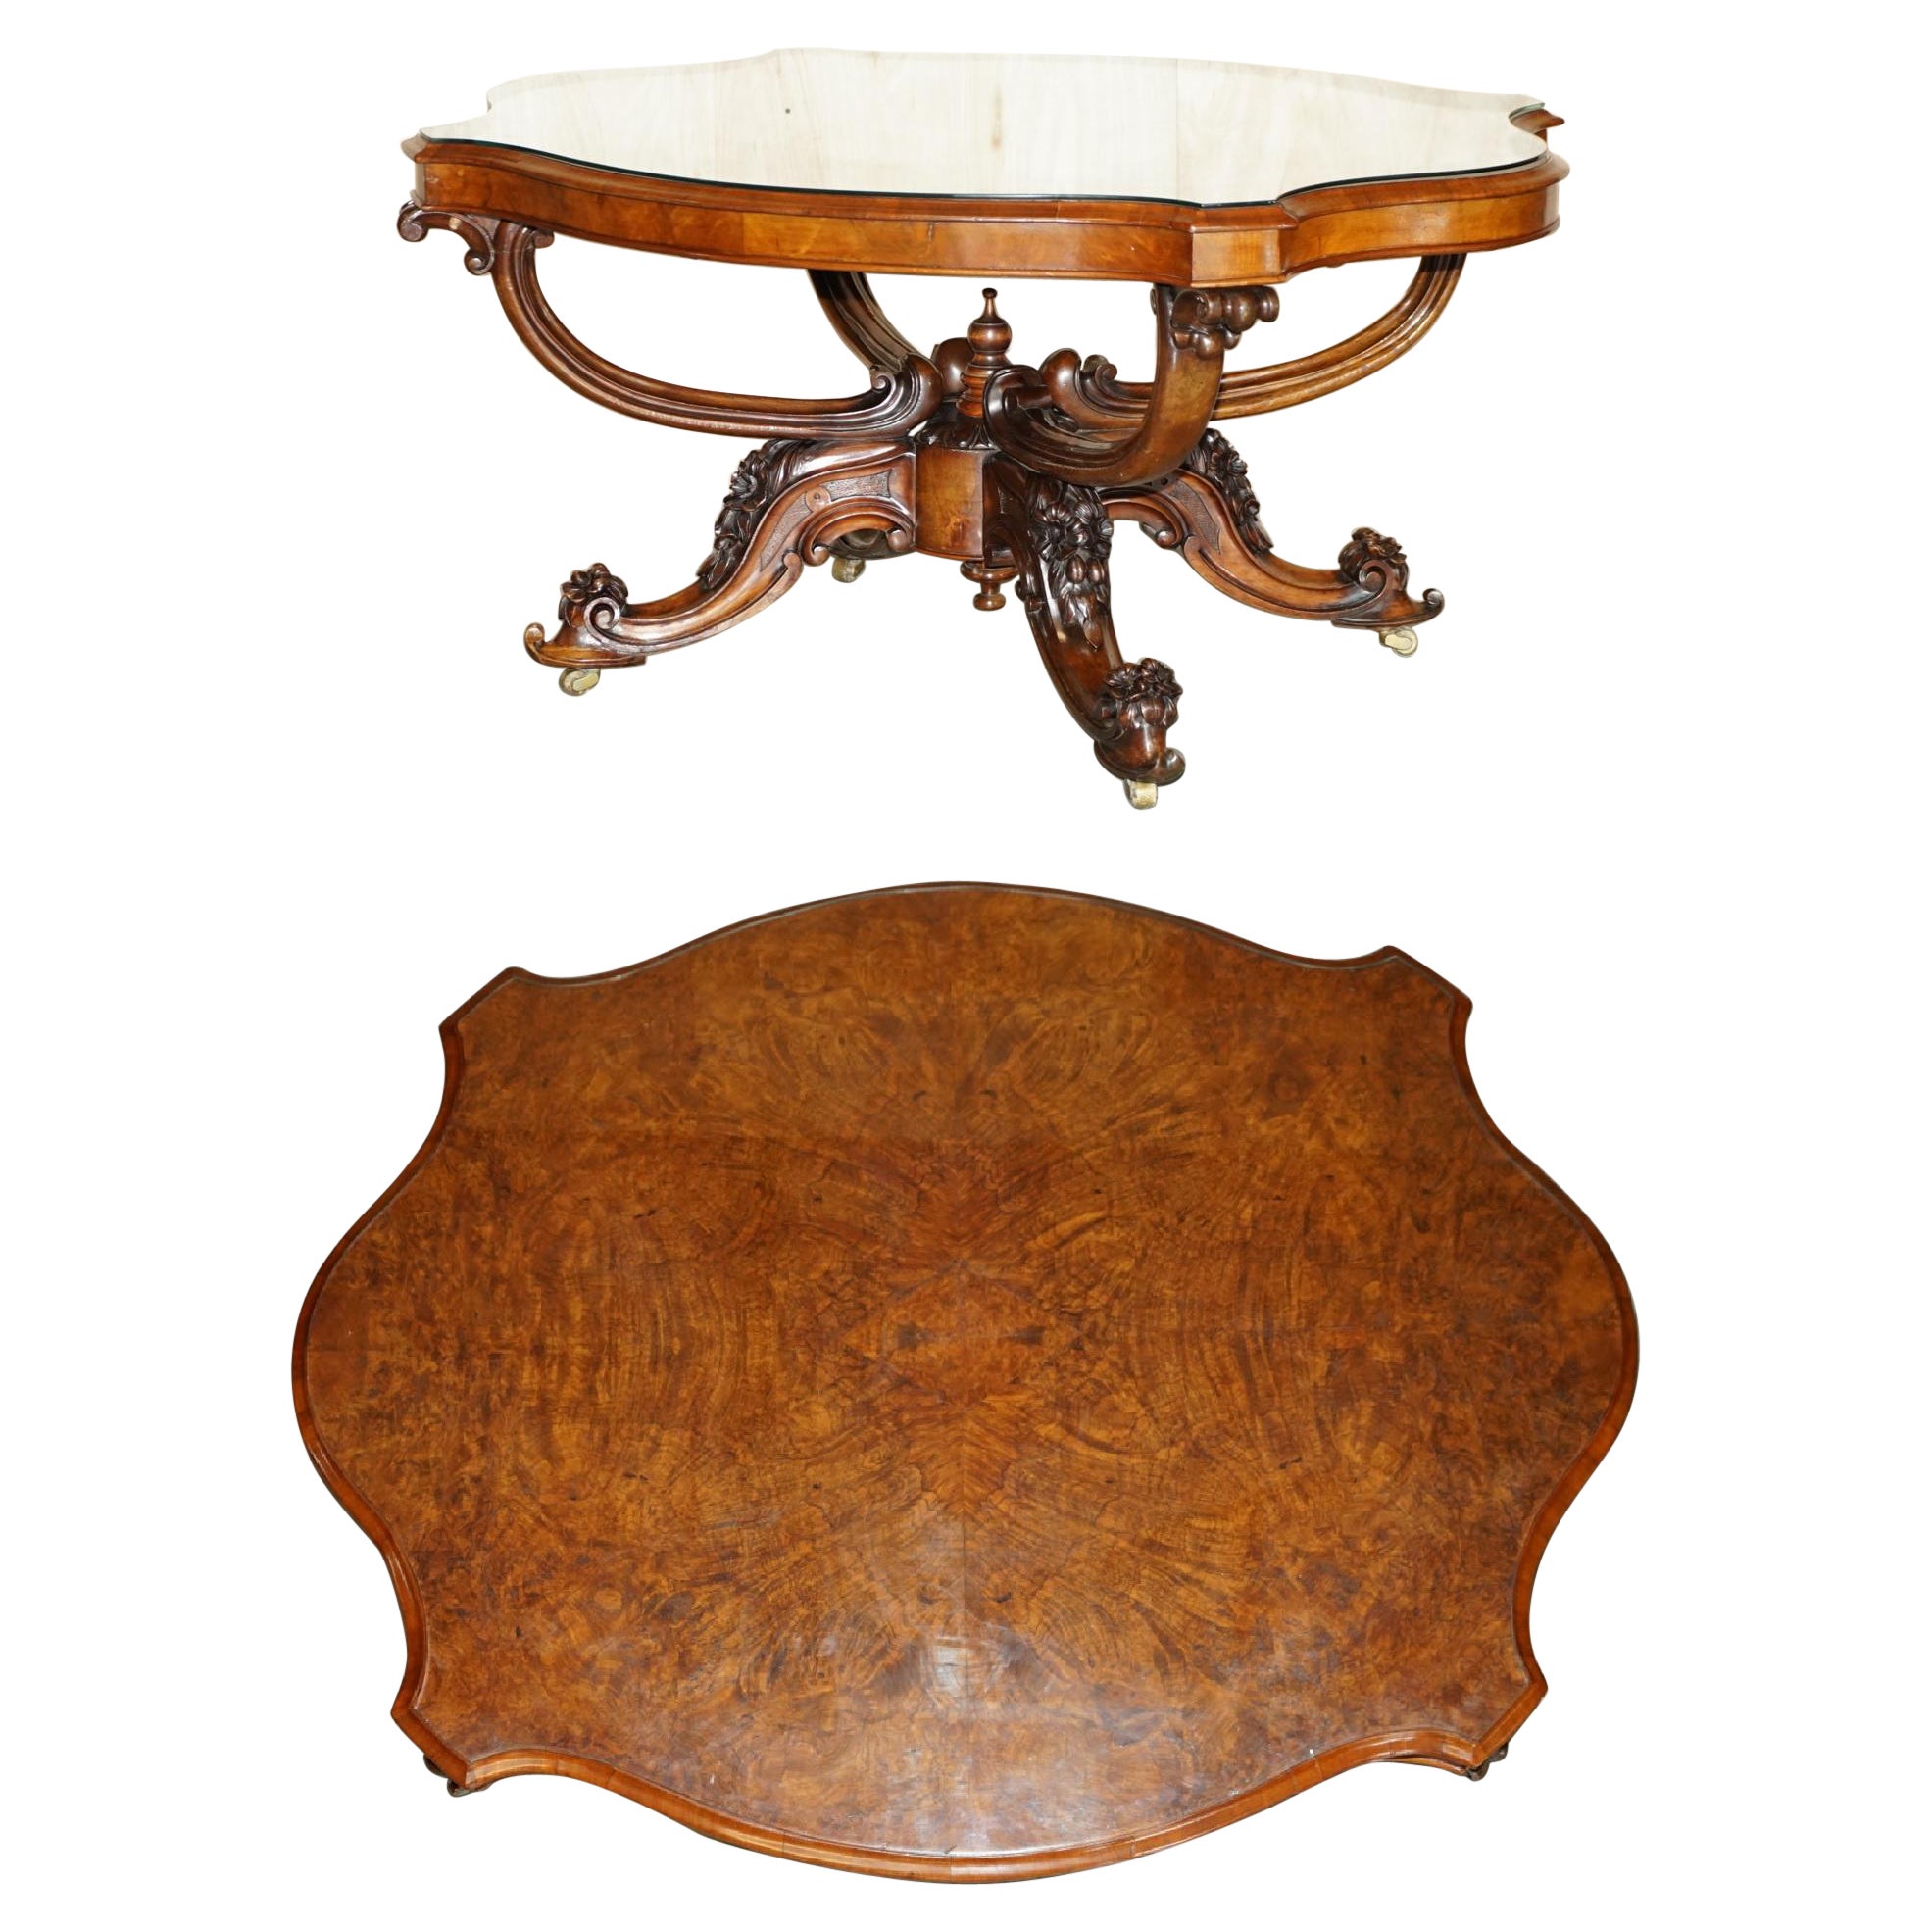 Very Fine circa 1860 Antique Victorian Ornately Carved Centre Burr Walnut Table For Sale